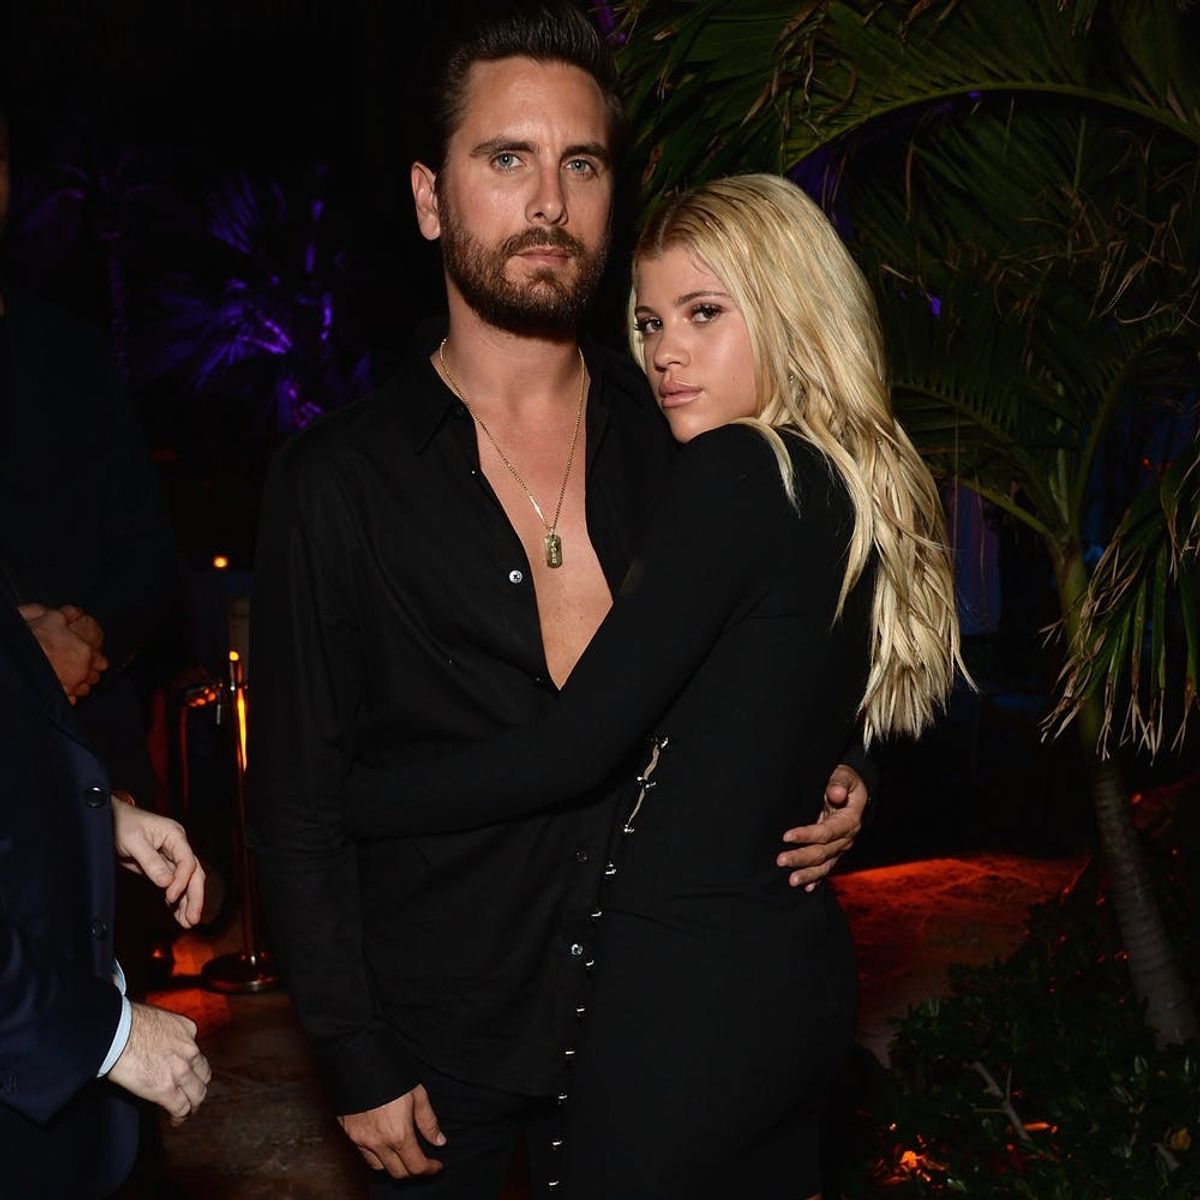 Scott Disick and Sofia Richie Look Cozy at Their First Event As a Couple